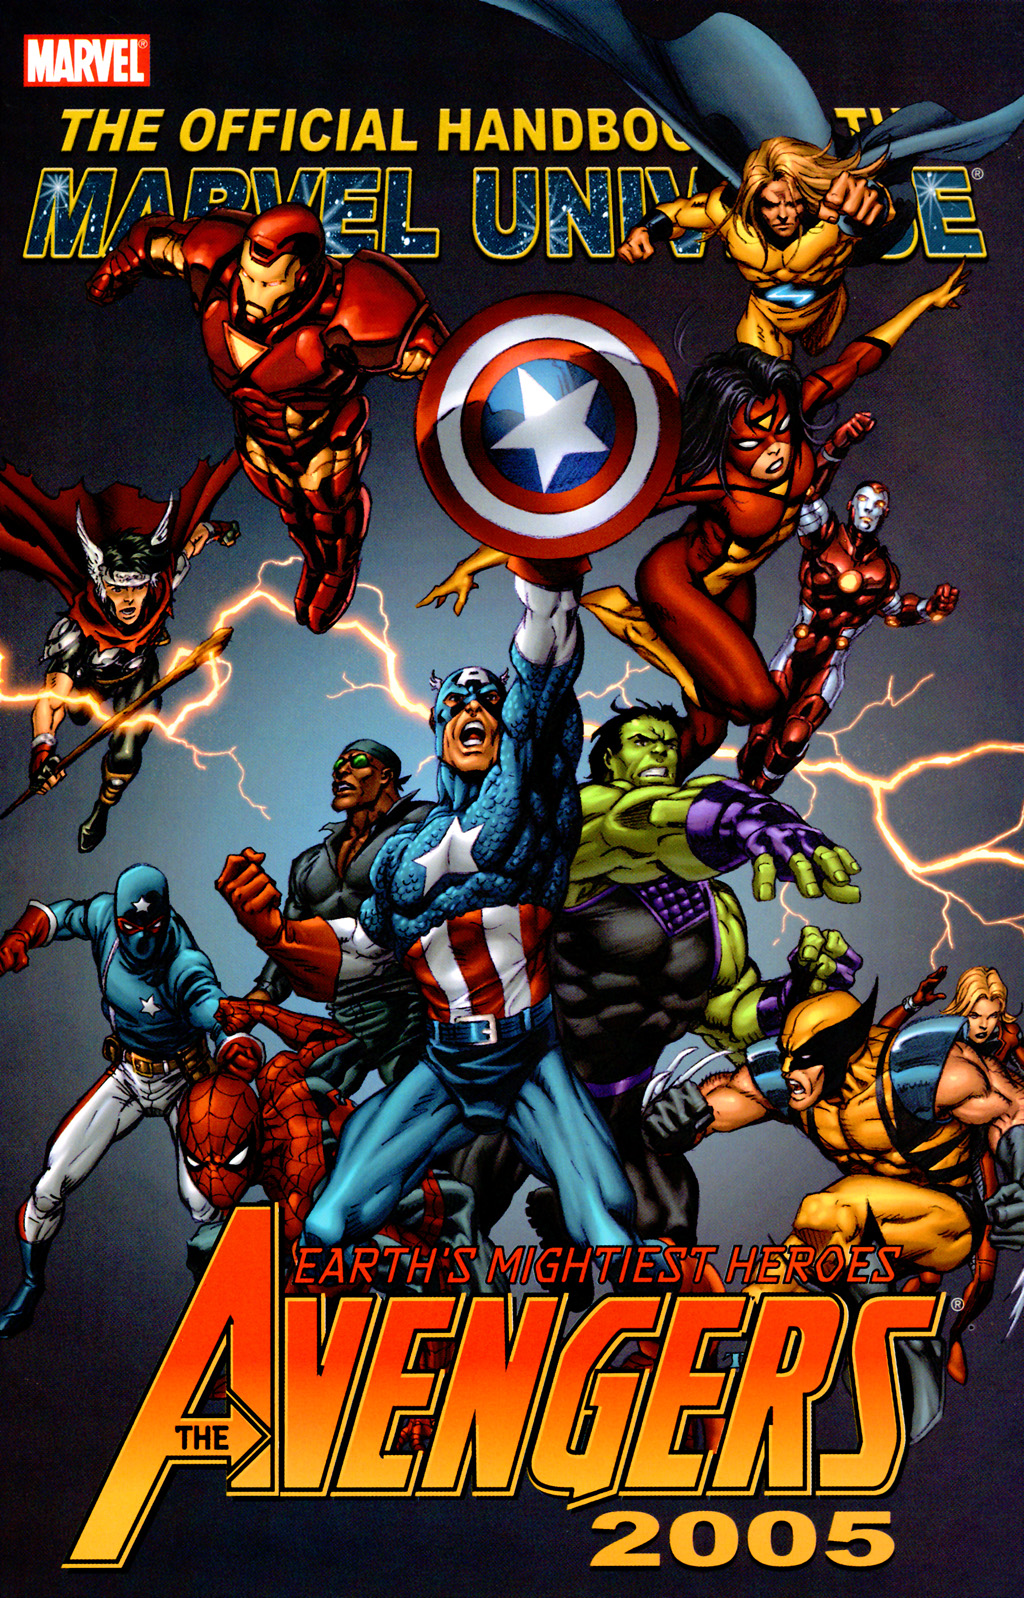 Read online Official Handbook of the Marvel Universe: Avengers 2005 comic -  Issue # Full - 1